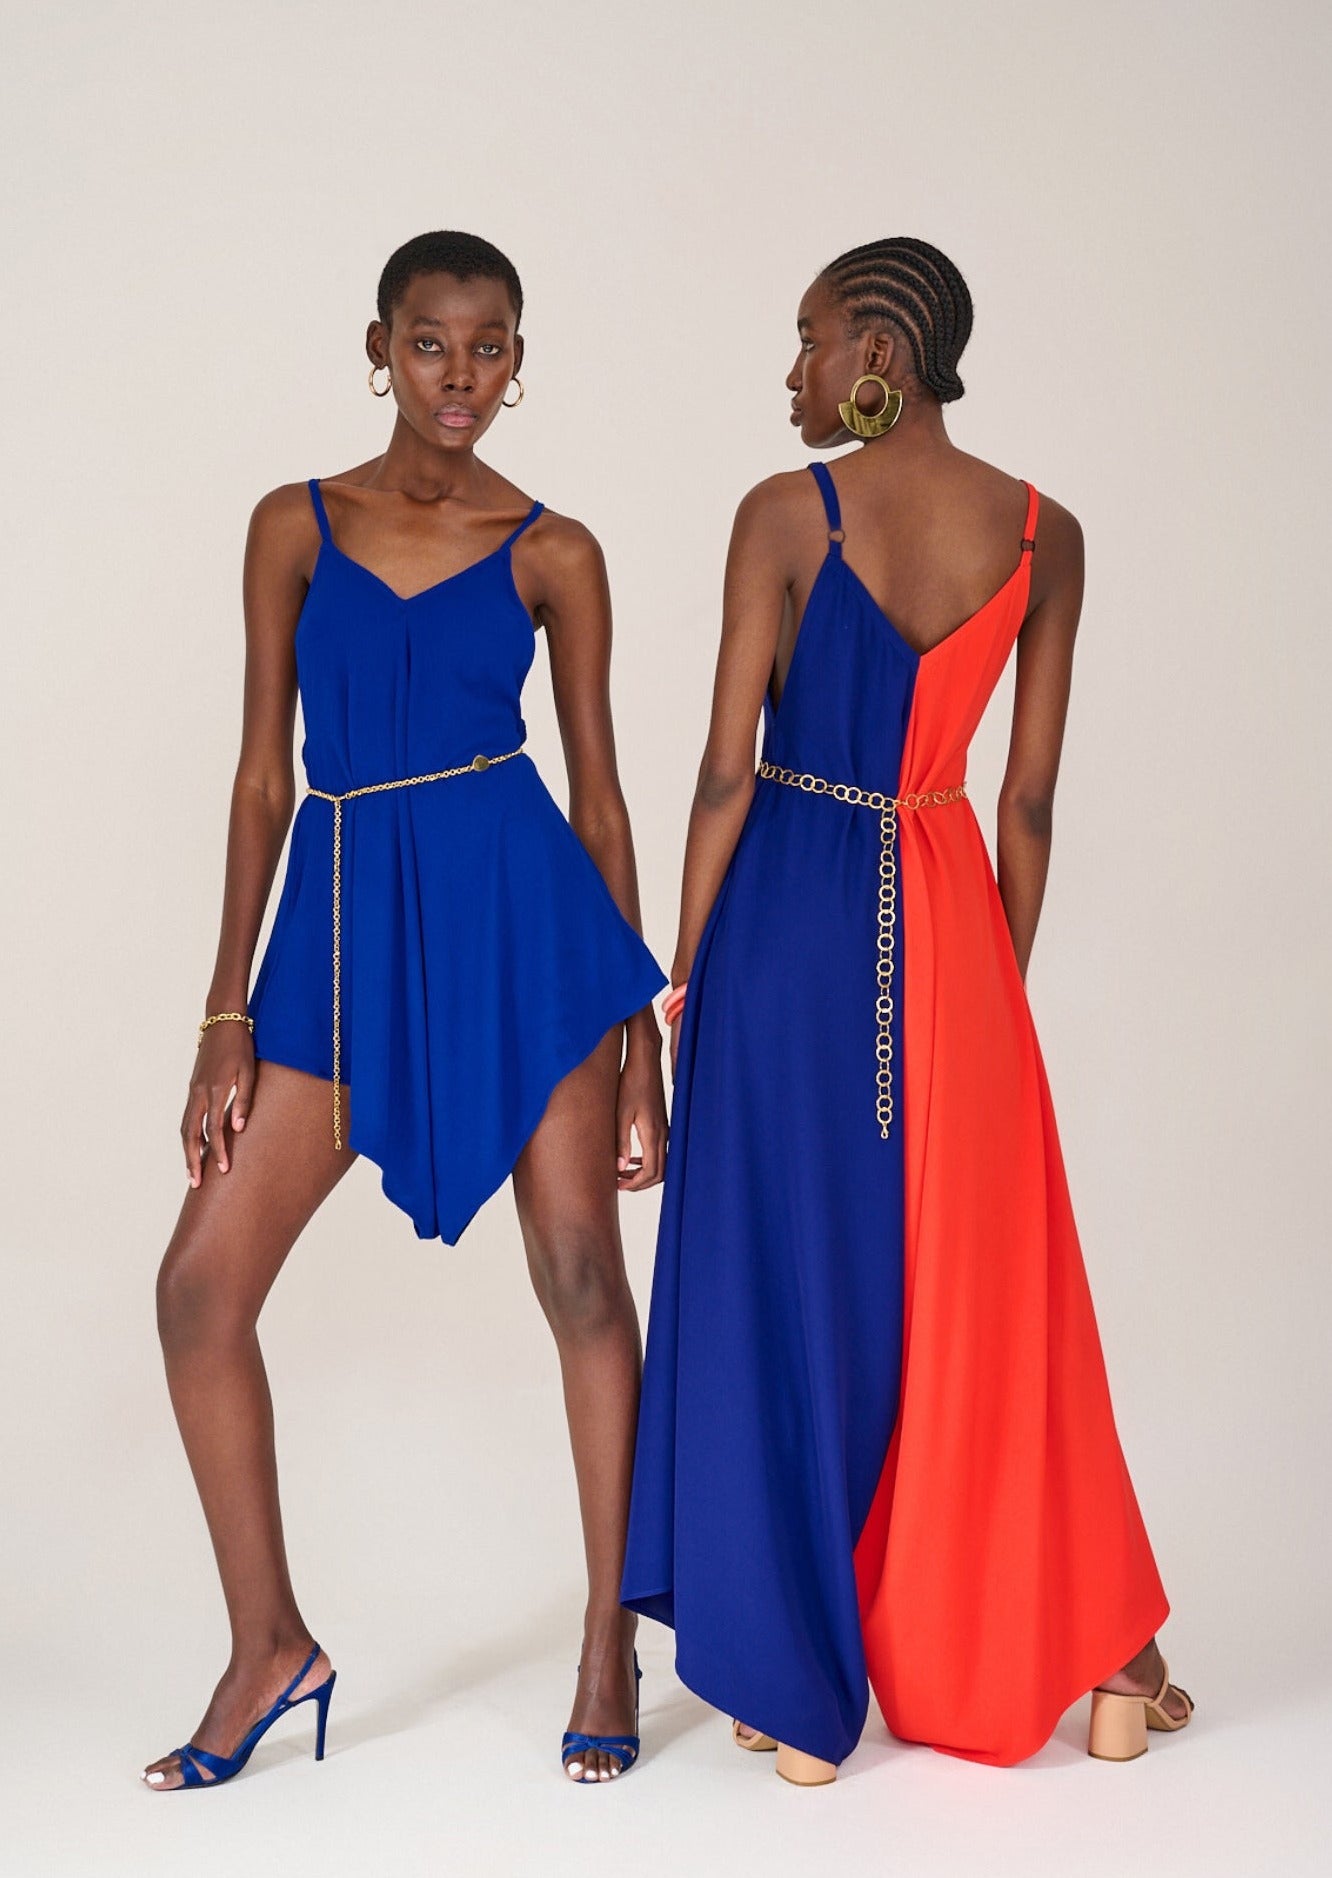 Two models posing together, one facing forwards wearing the Kloofstreet Playsuit and the other facing backwards in the Longstreet Colour Block Jumpsuit by KAHINDO